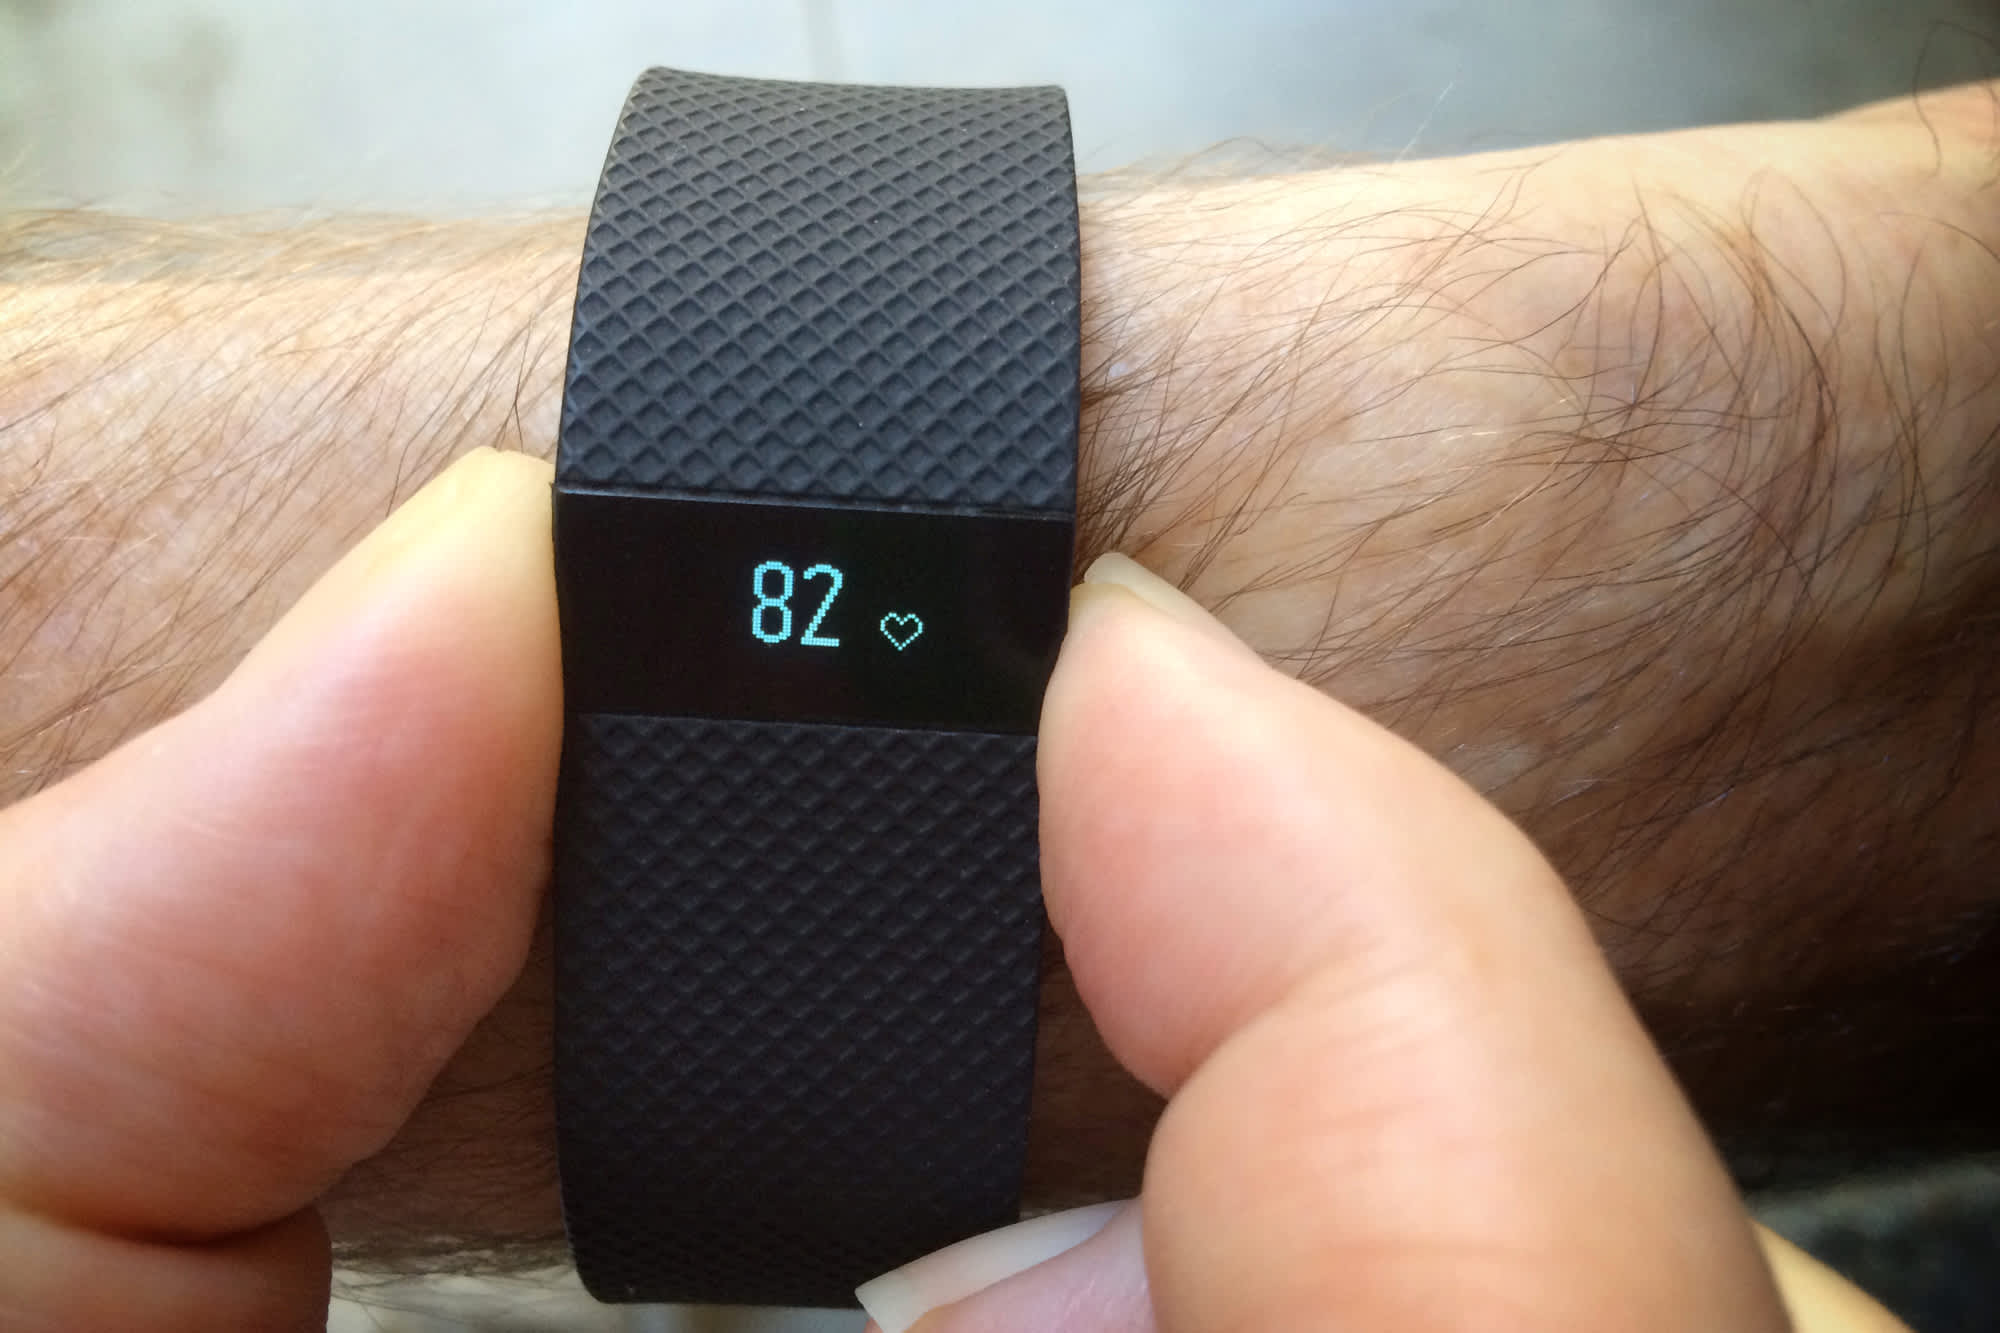 fitbit heart rate monitor inaccurate